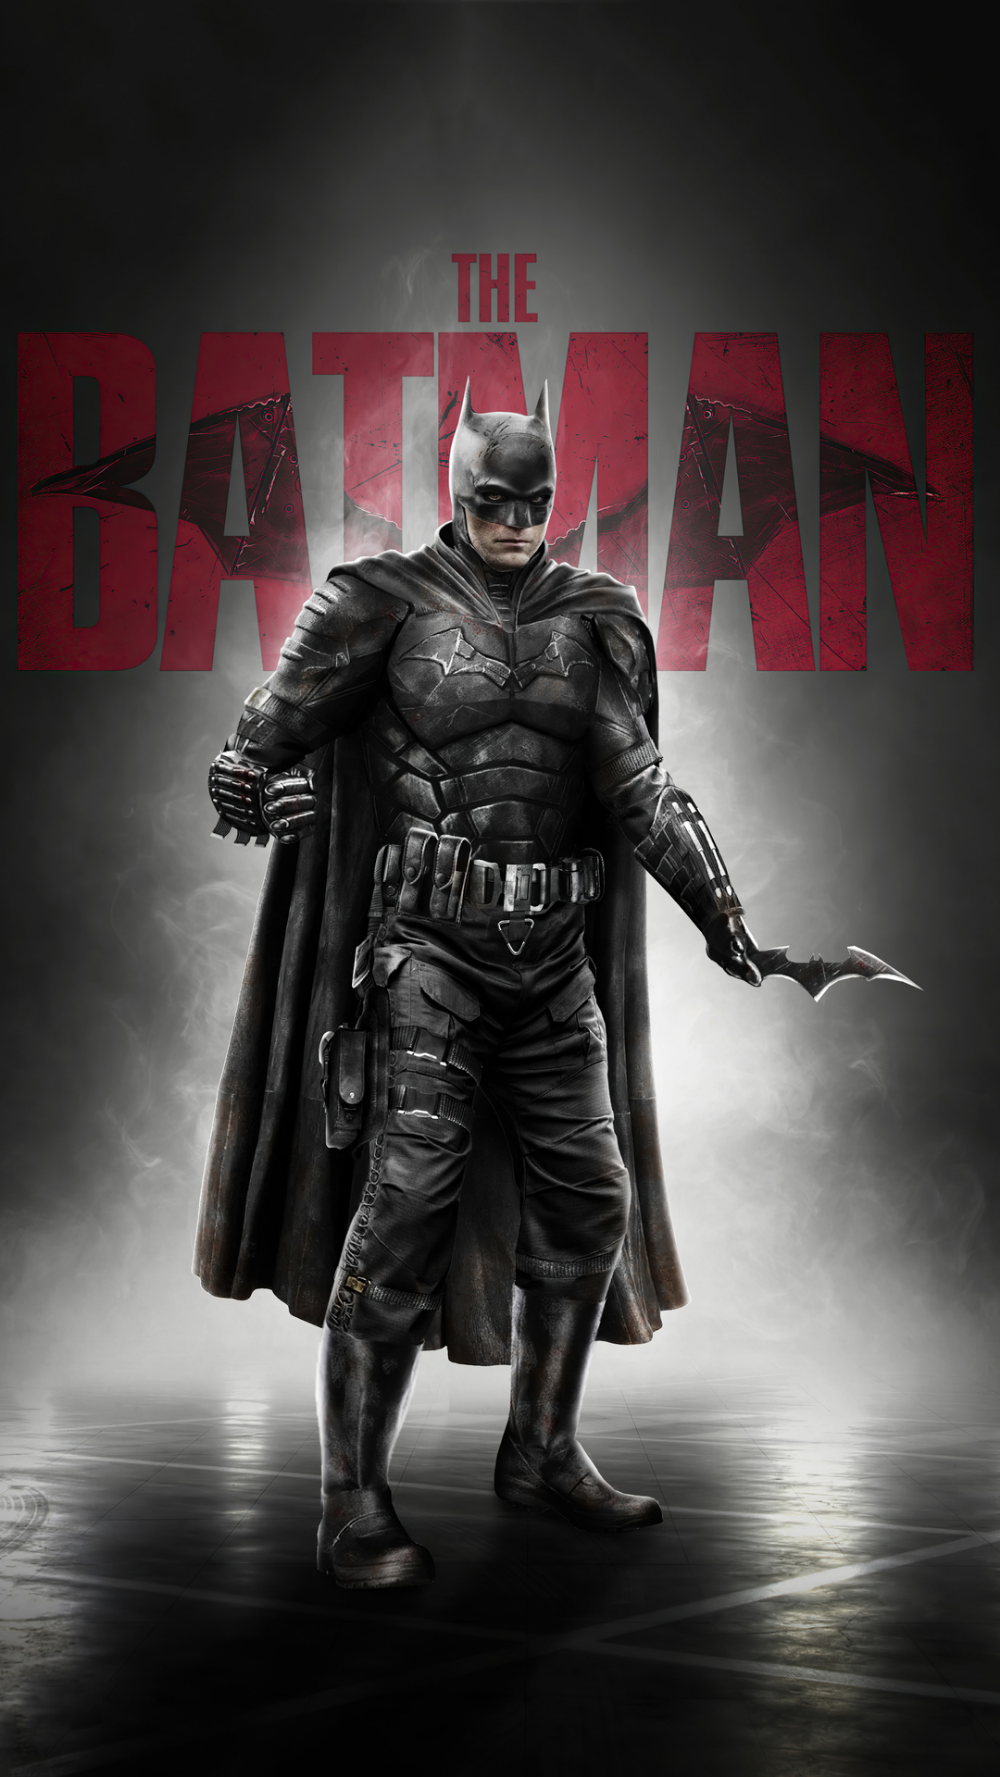 The BatmanK wallpaper, free and easy to download. Batman picture, Batman poster, Batman wallpaper